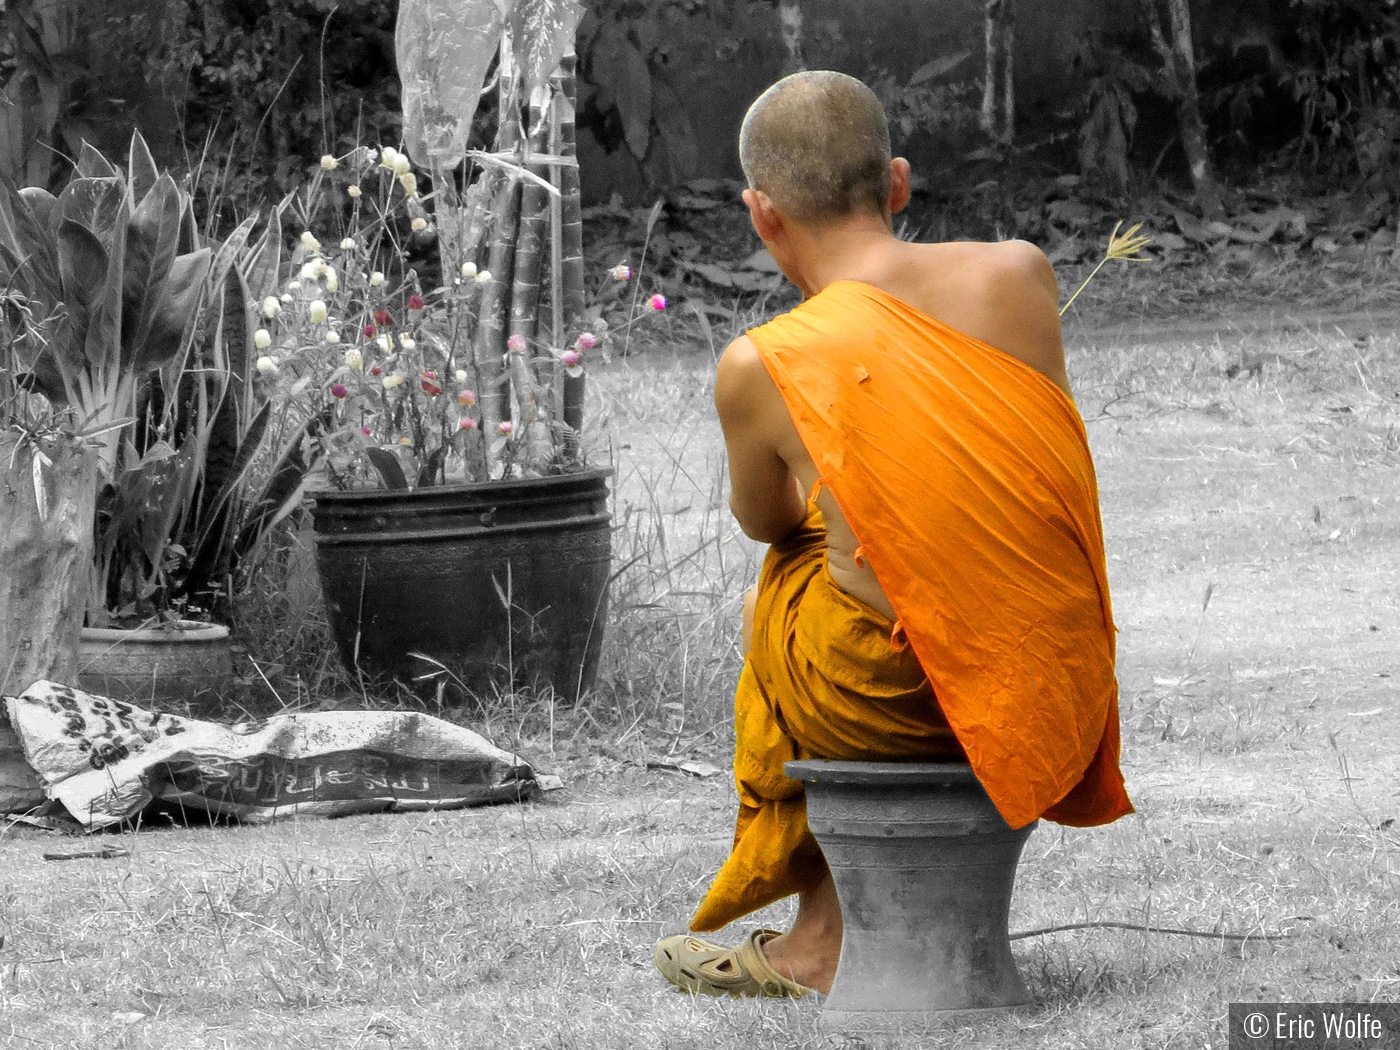 Buddhist and the Bud by Eric Wolfe